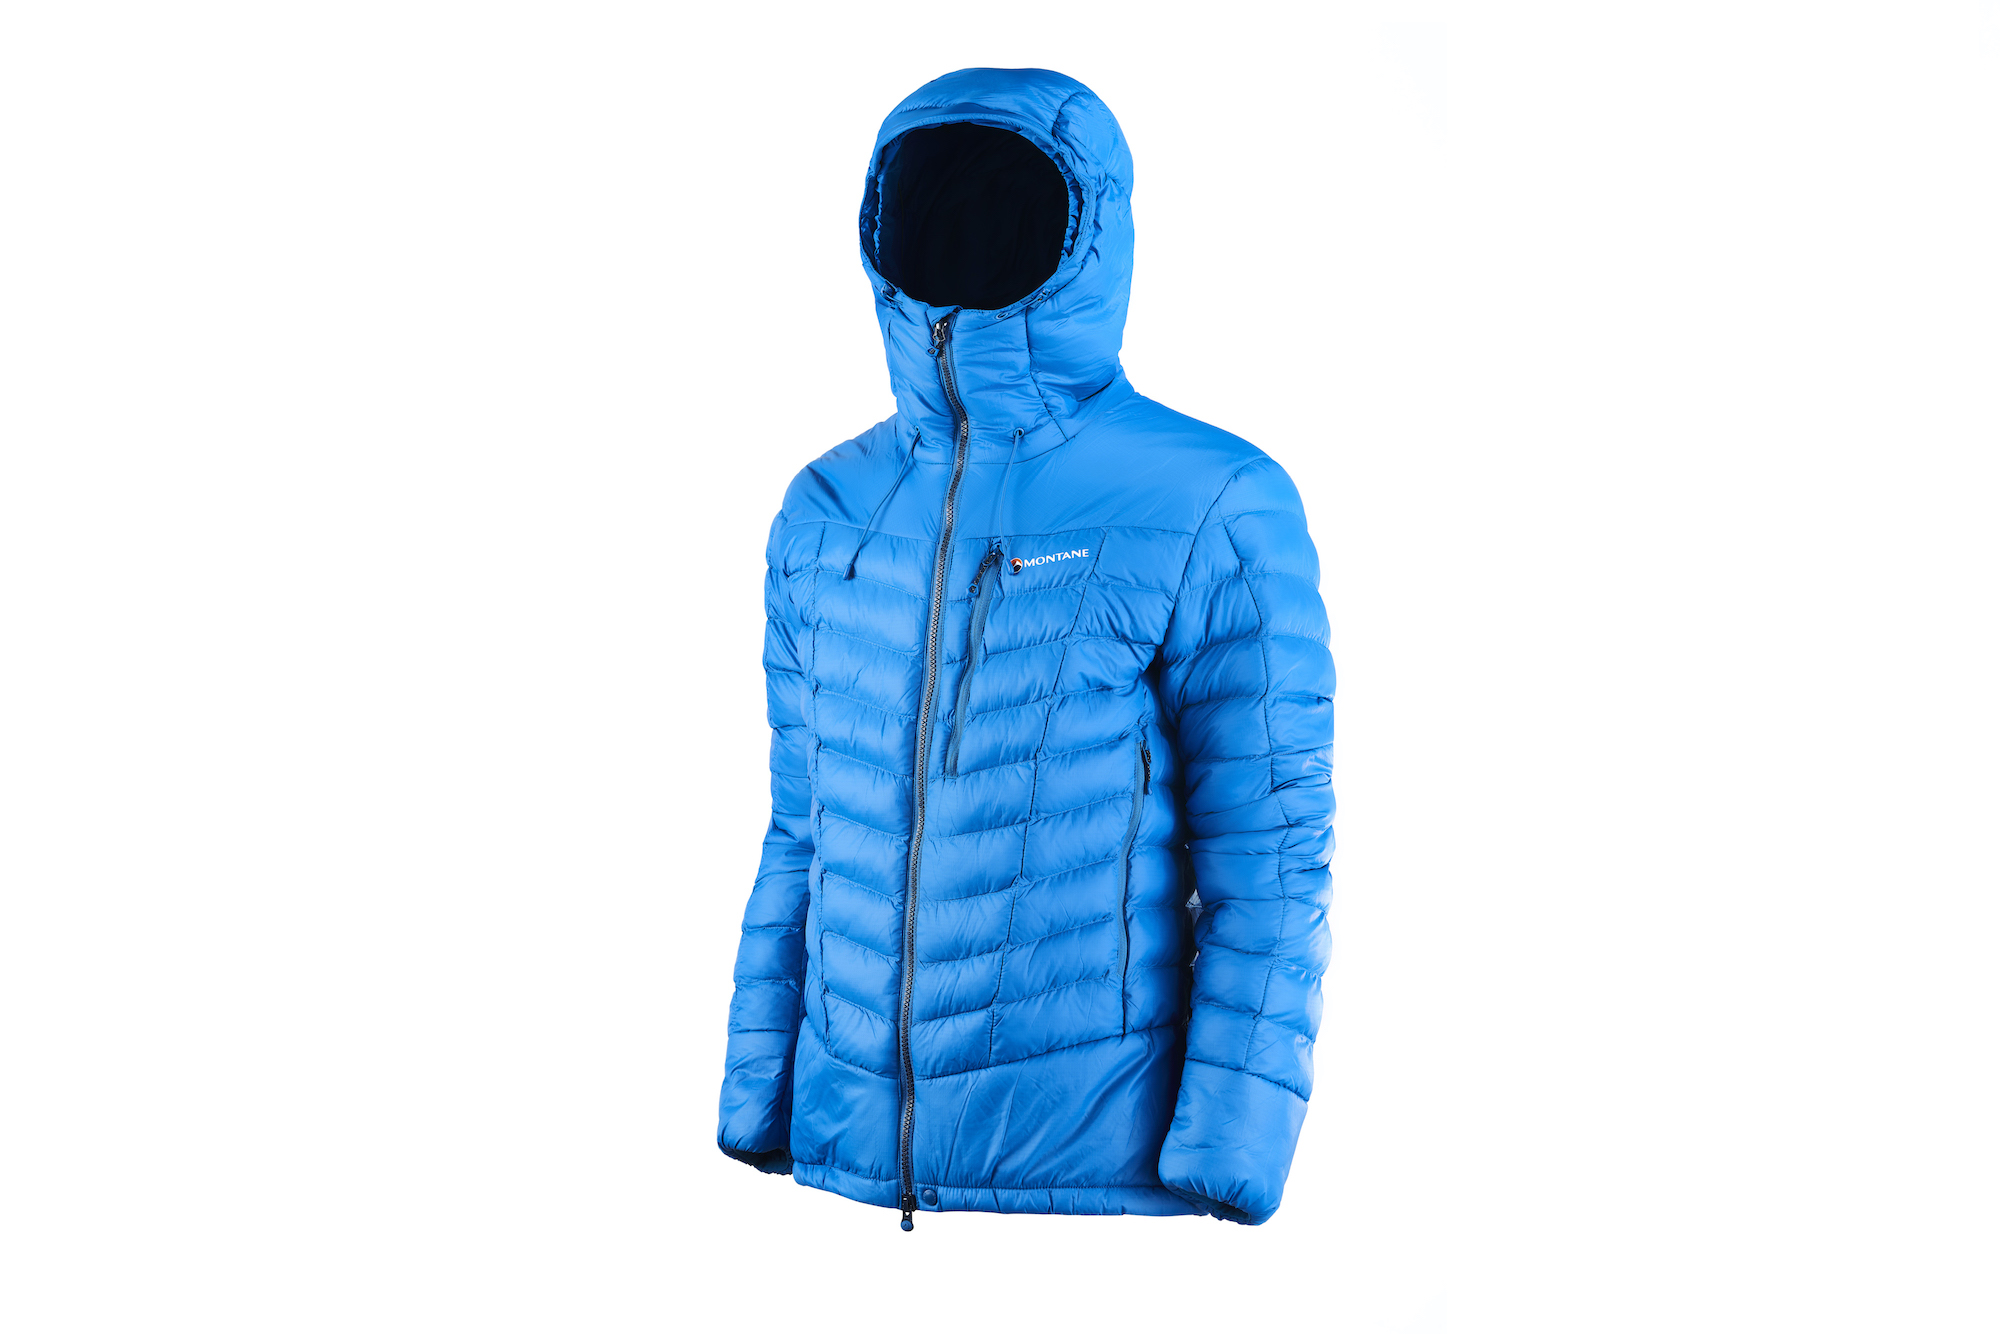 Montane Ground Control insulated jacket